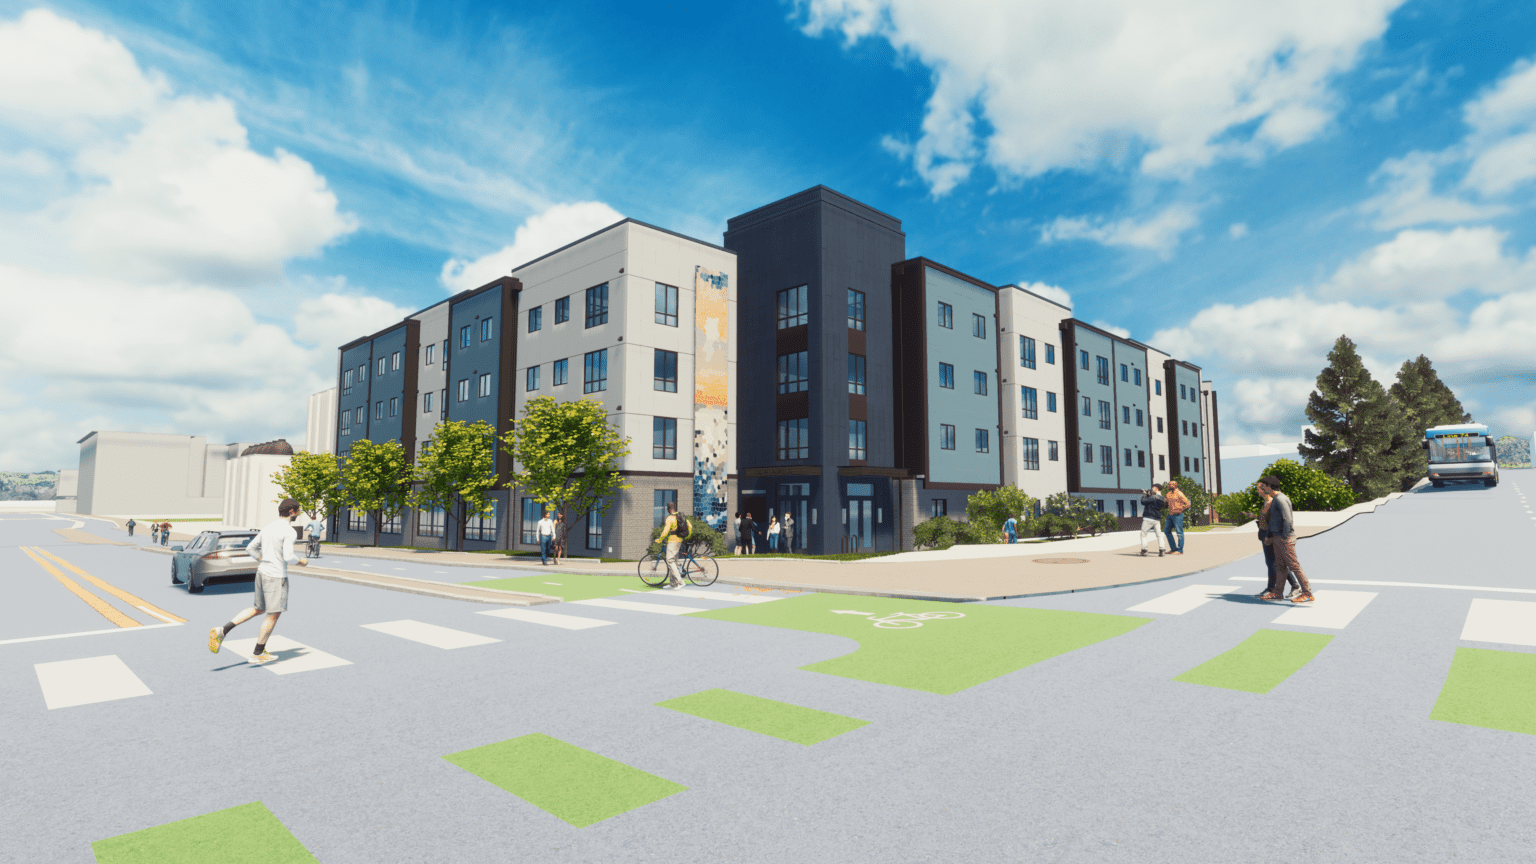 The visual representation of Millworks affordable housing project once its completed.